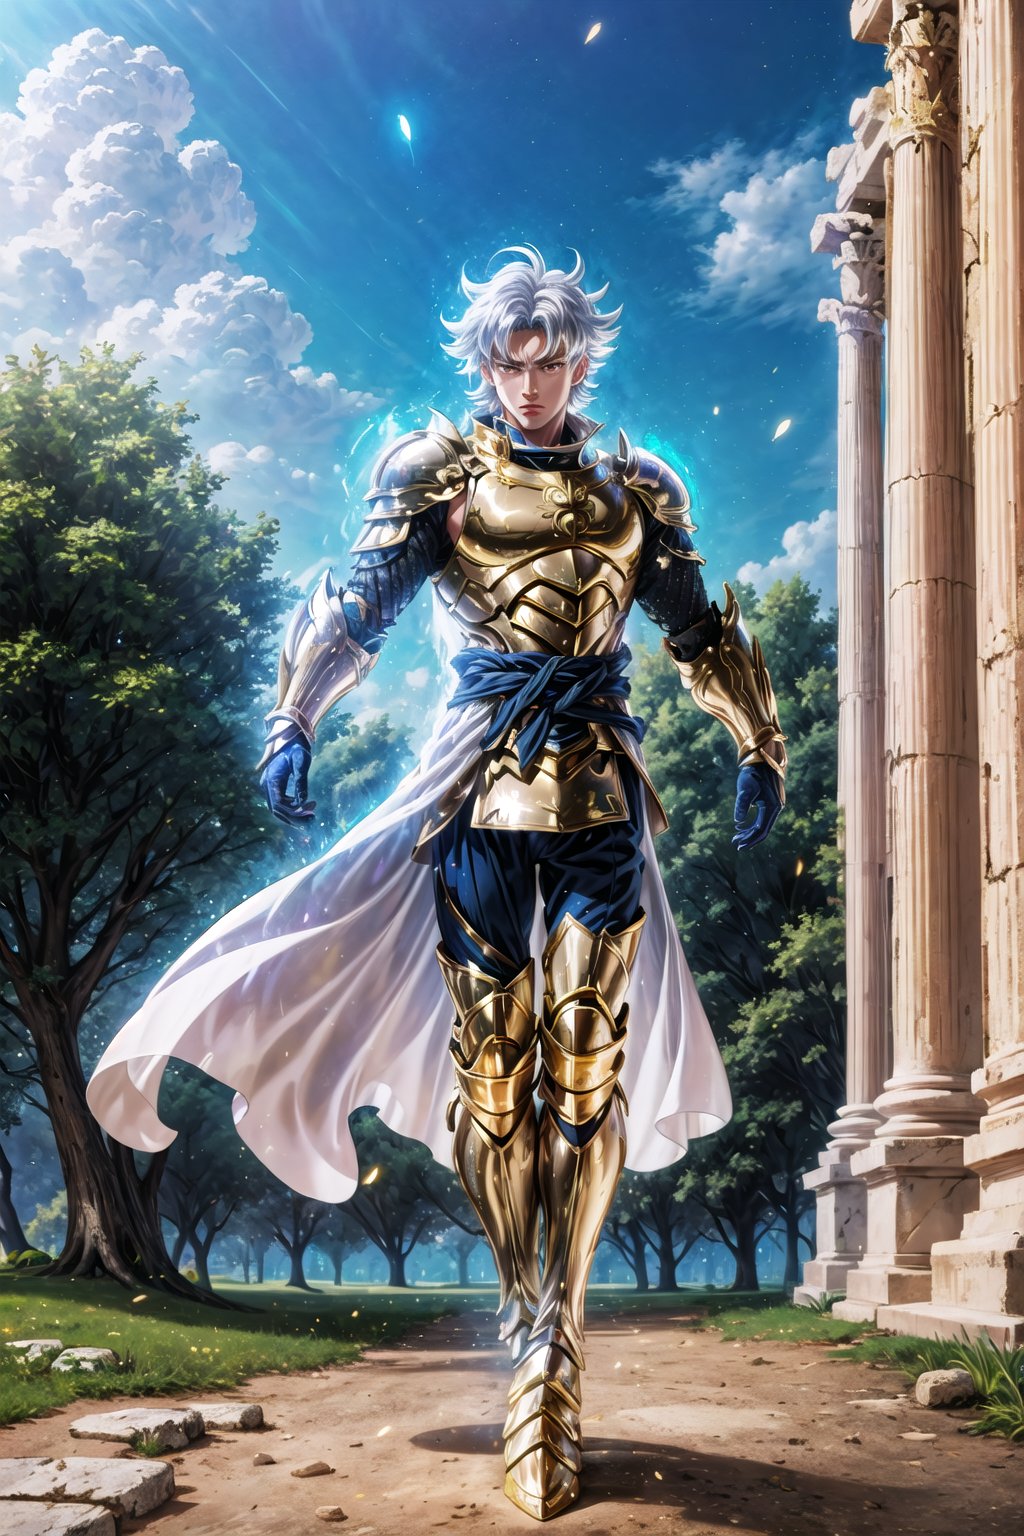 absurdres, highres, ultra detailed,Insane detail in face,  (boy:1.3), Gold Saint, Saint Seiya Style, Gold Armor, Full body armor, no helmet, Zodiac Knights, white long cape, long white hair, Fighting pose,Pokemon Gotcha Style, gold gloves, long hair, long white cape, messy_hair,  Gold eyes, black pants under armor, full body armor, beautiful old greek temple in the background, beautiful fields, full leg armor, gold aura